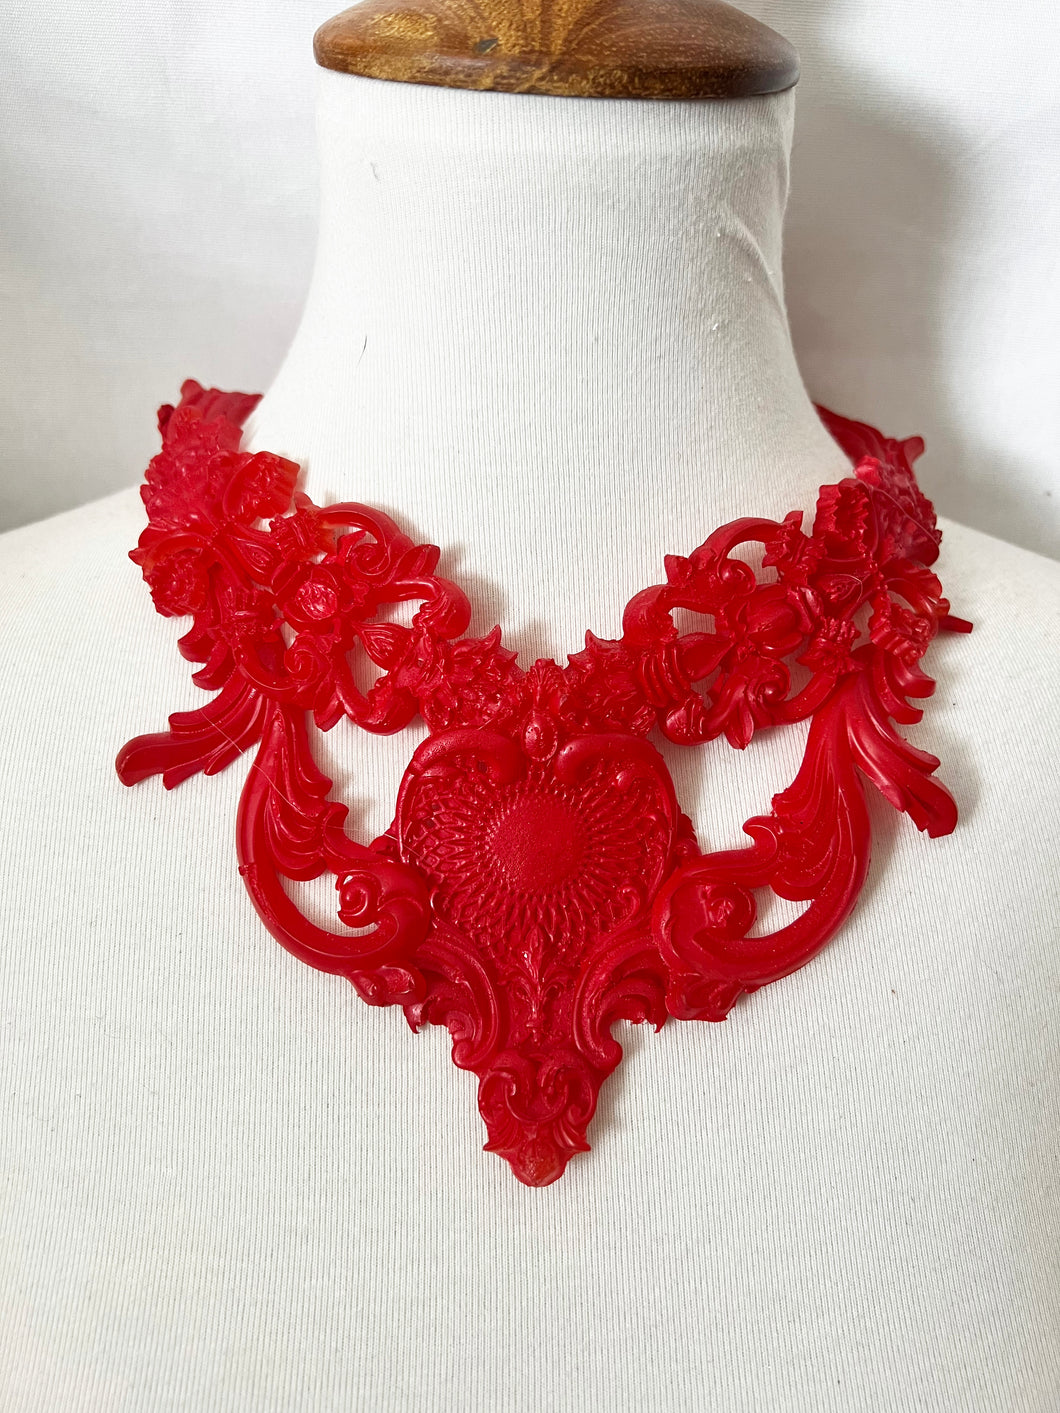 Liquid Red 3D Handmade red latex rubber necklace